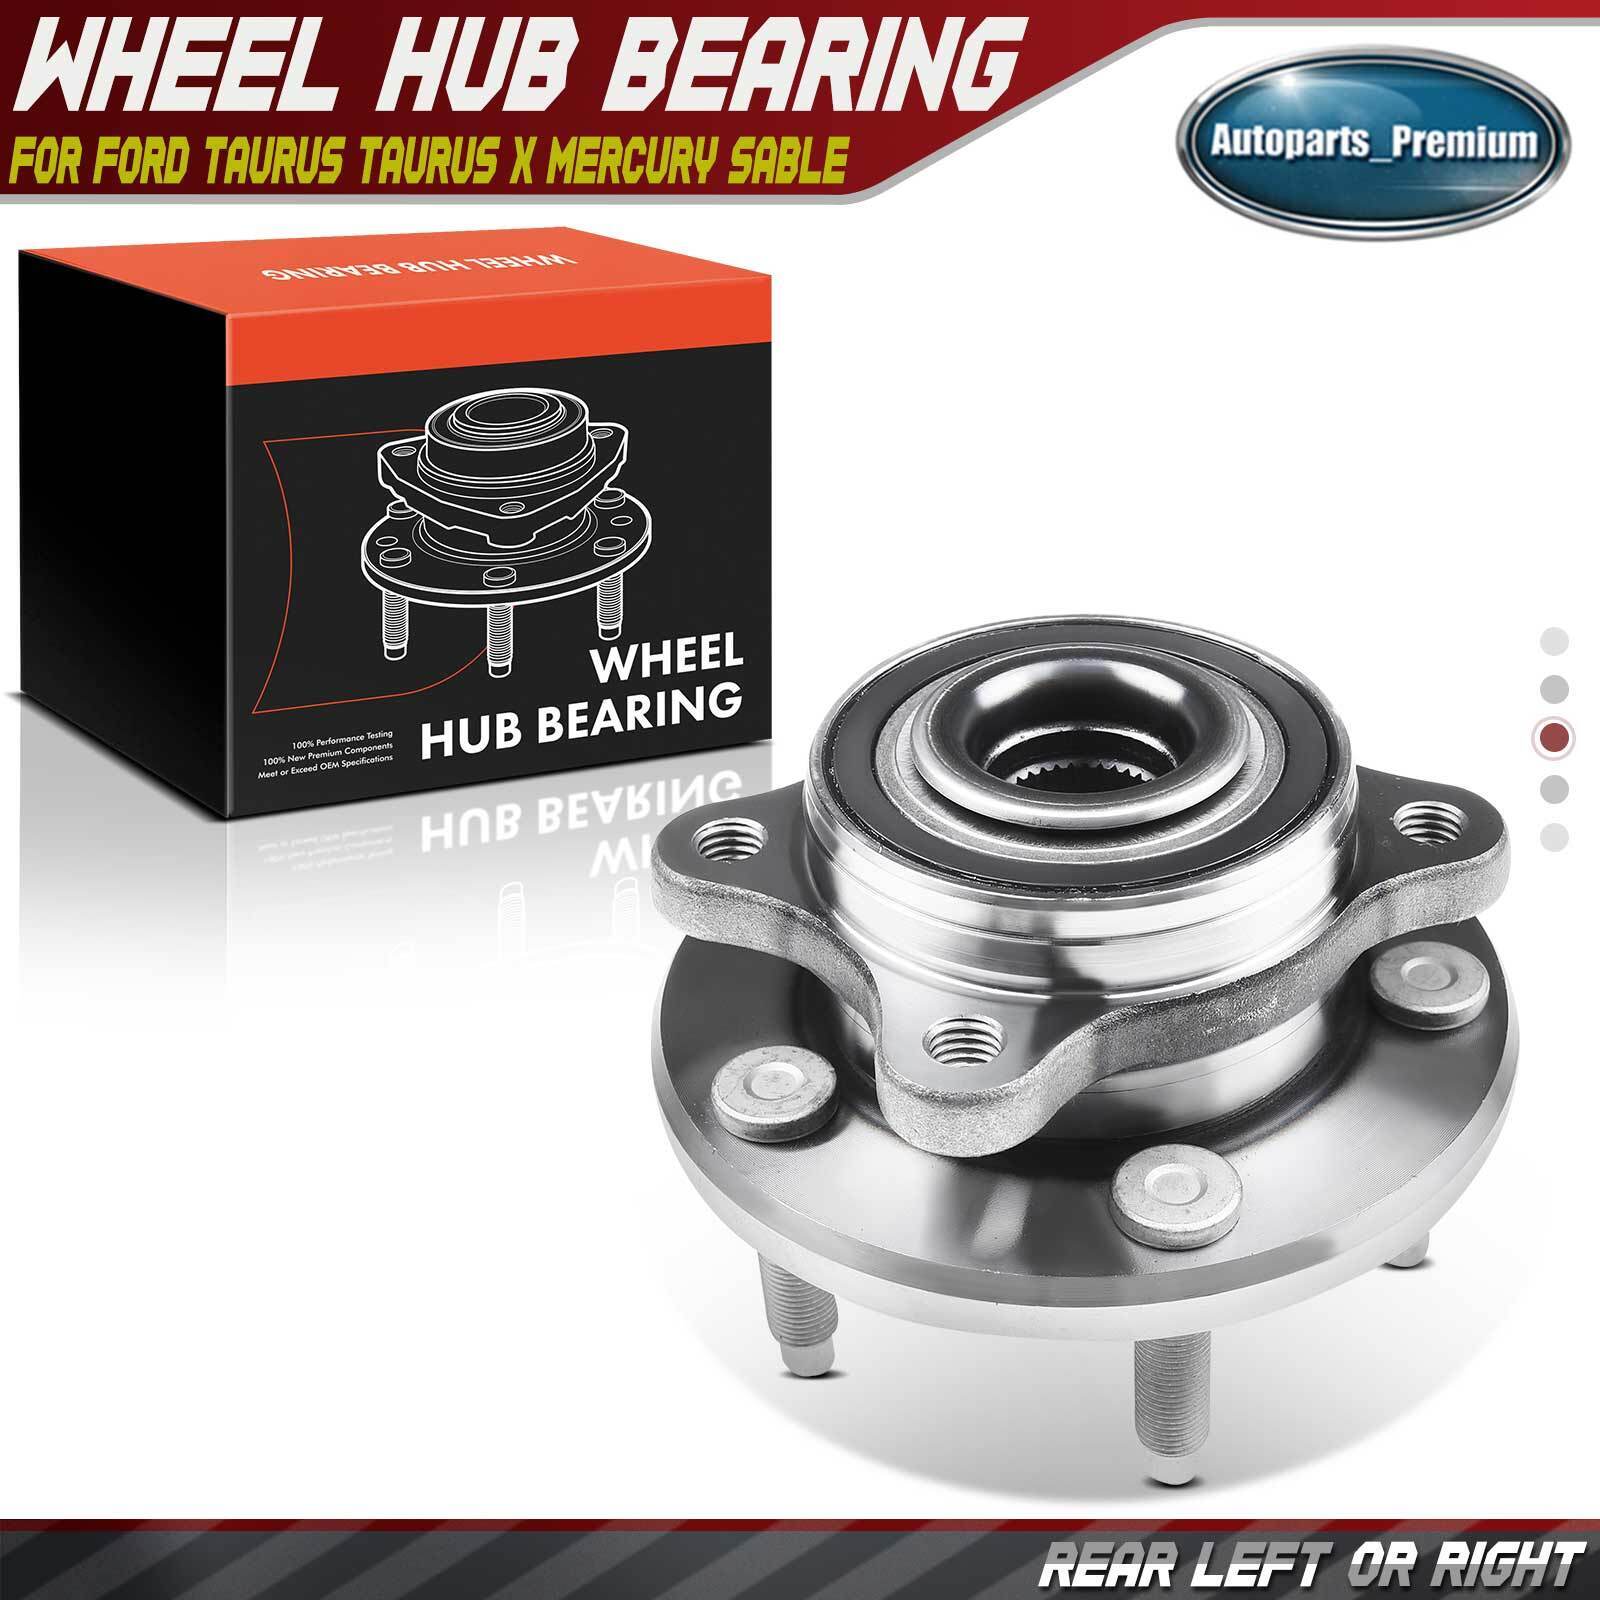 Wheel Hub Bearing Assembly for Ford Five Hundred Freestyle Taurus Mercury Sable